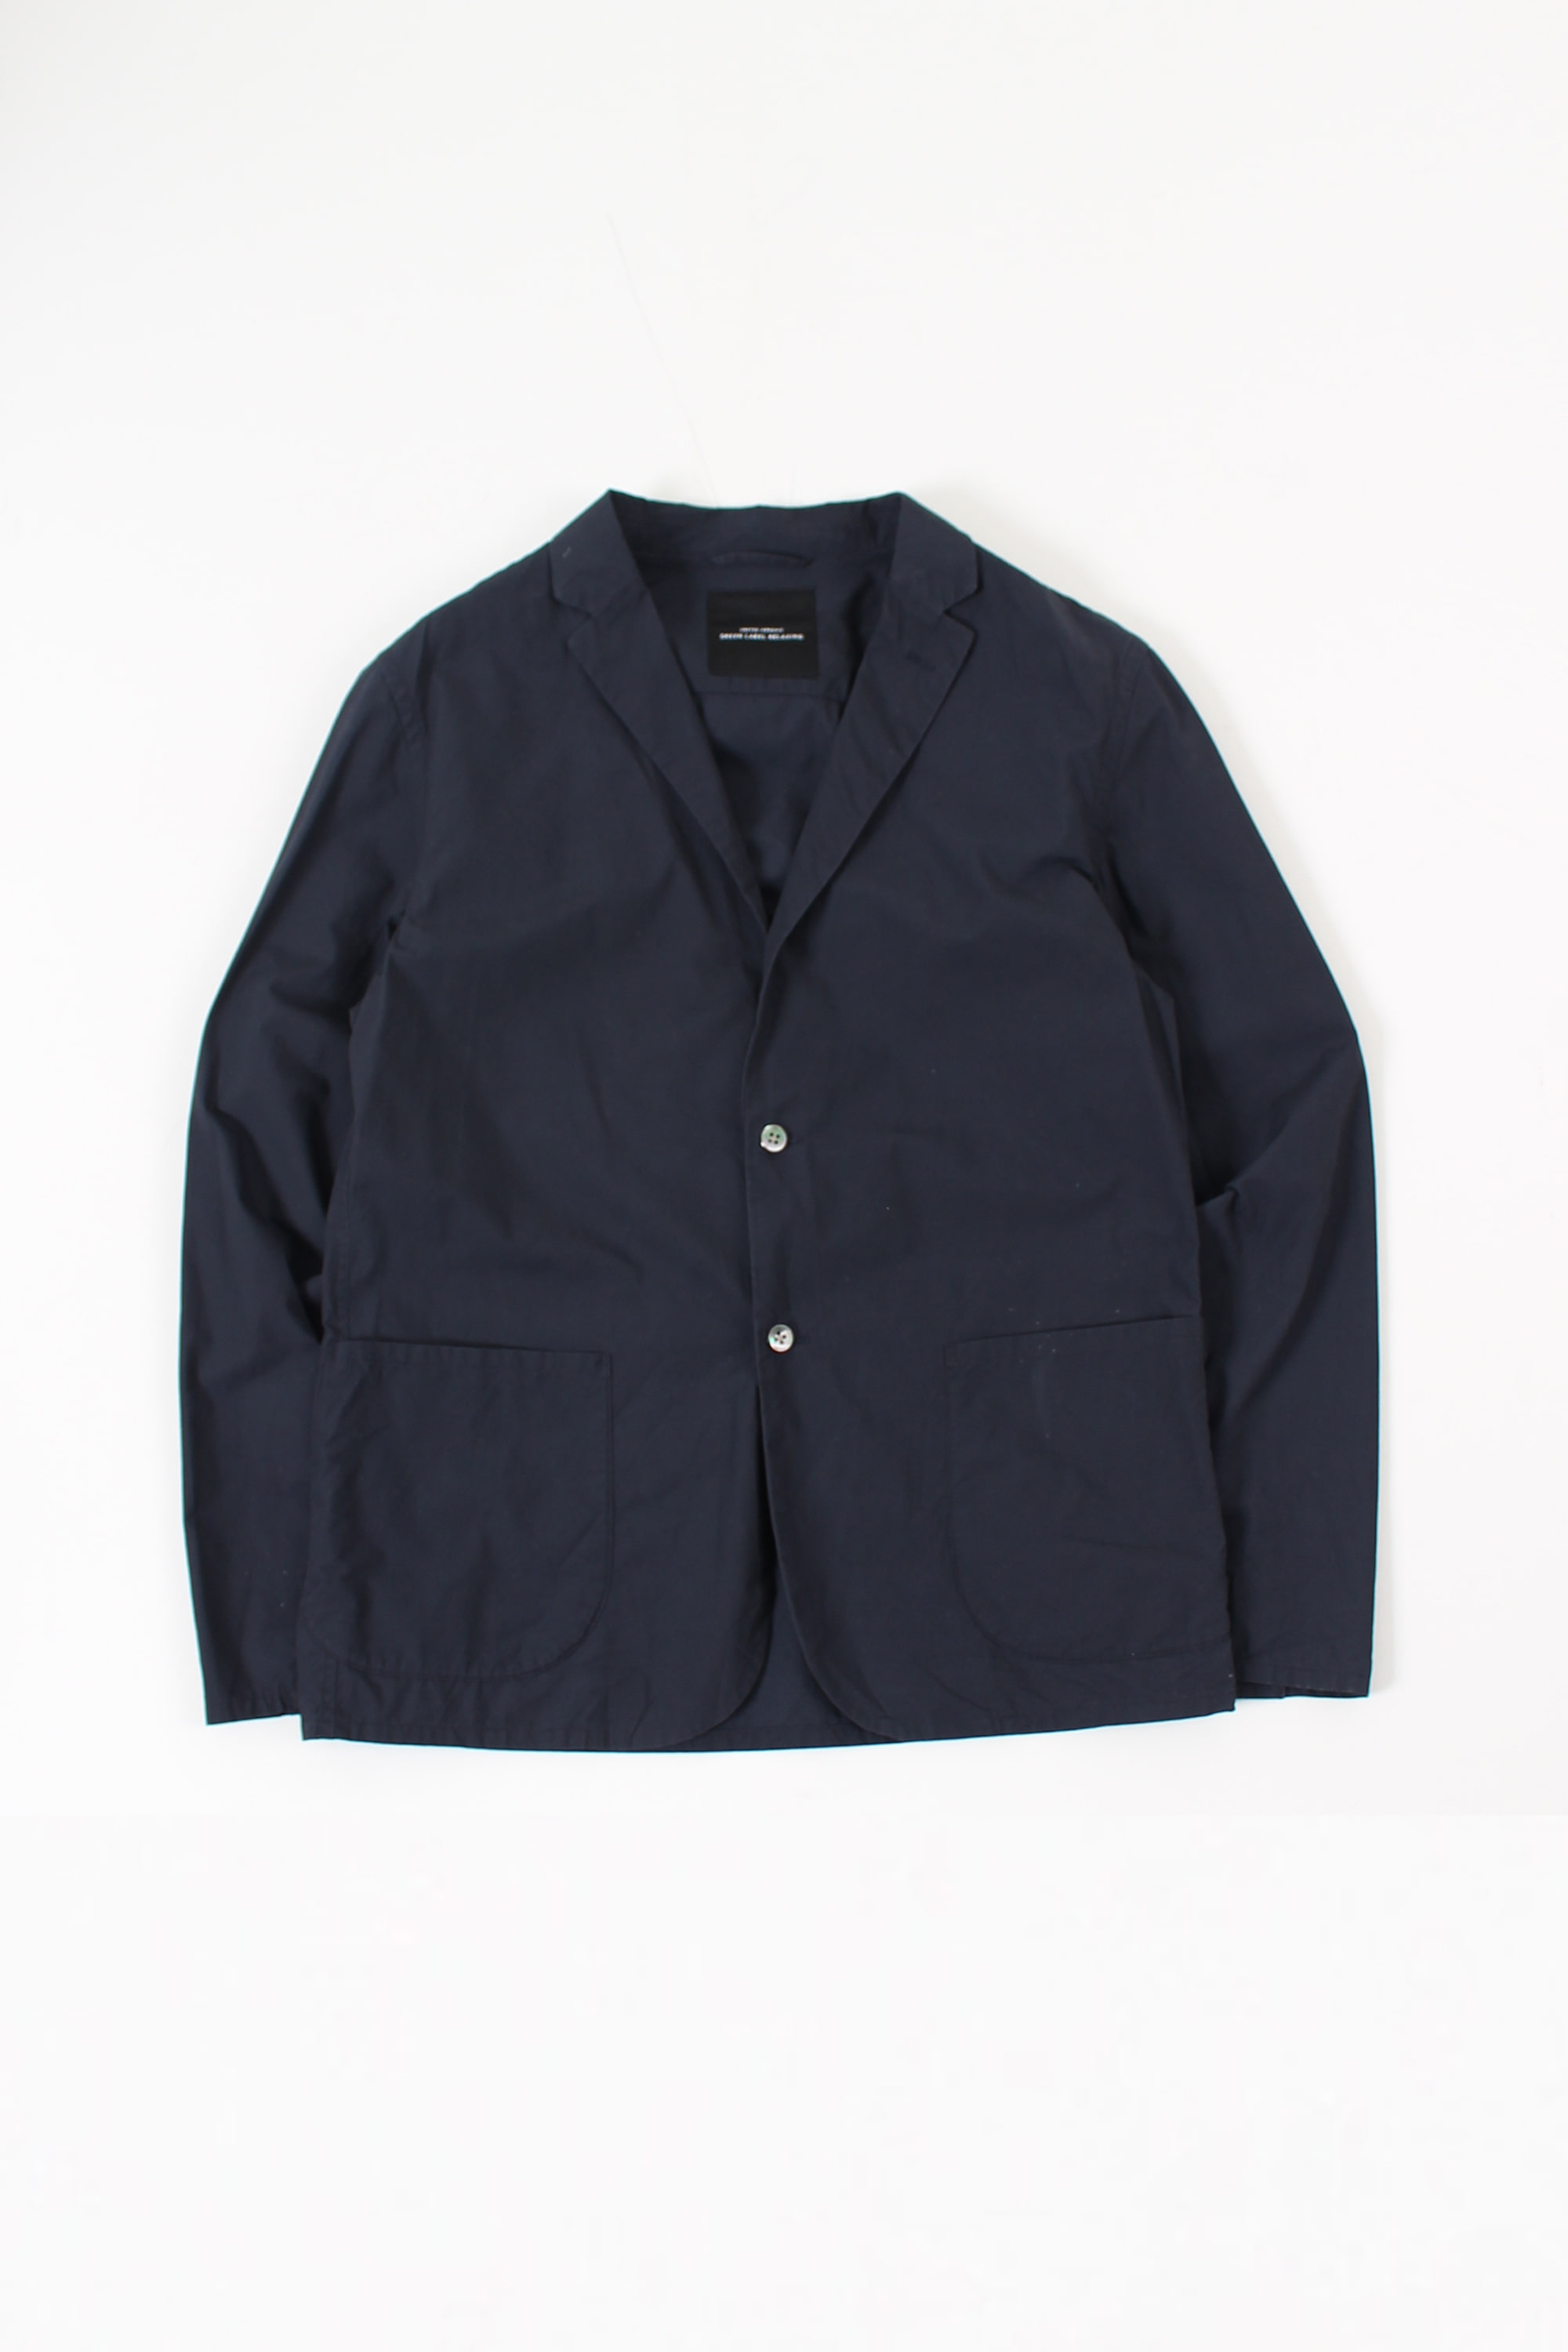 united arrows green label relaxing cotton jacket